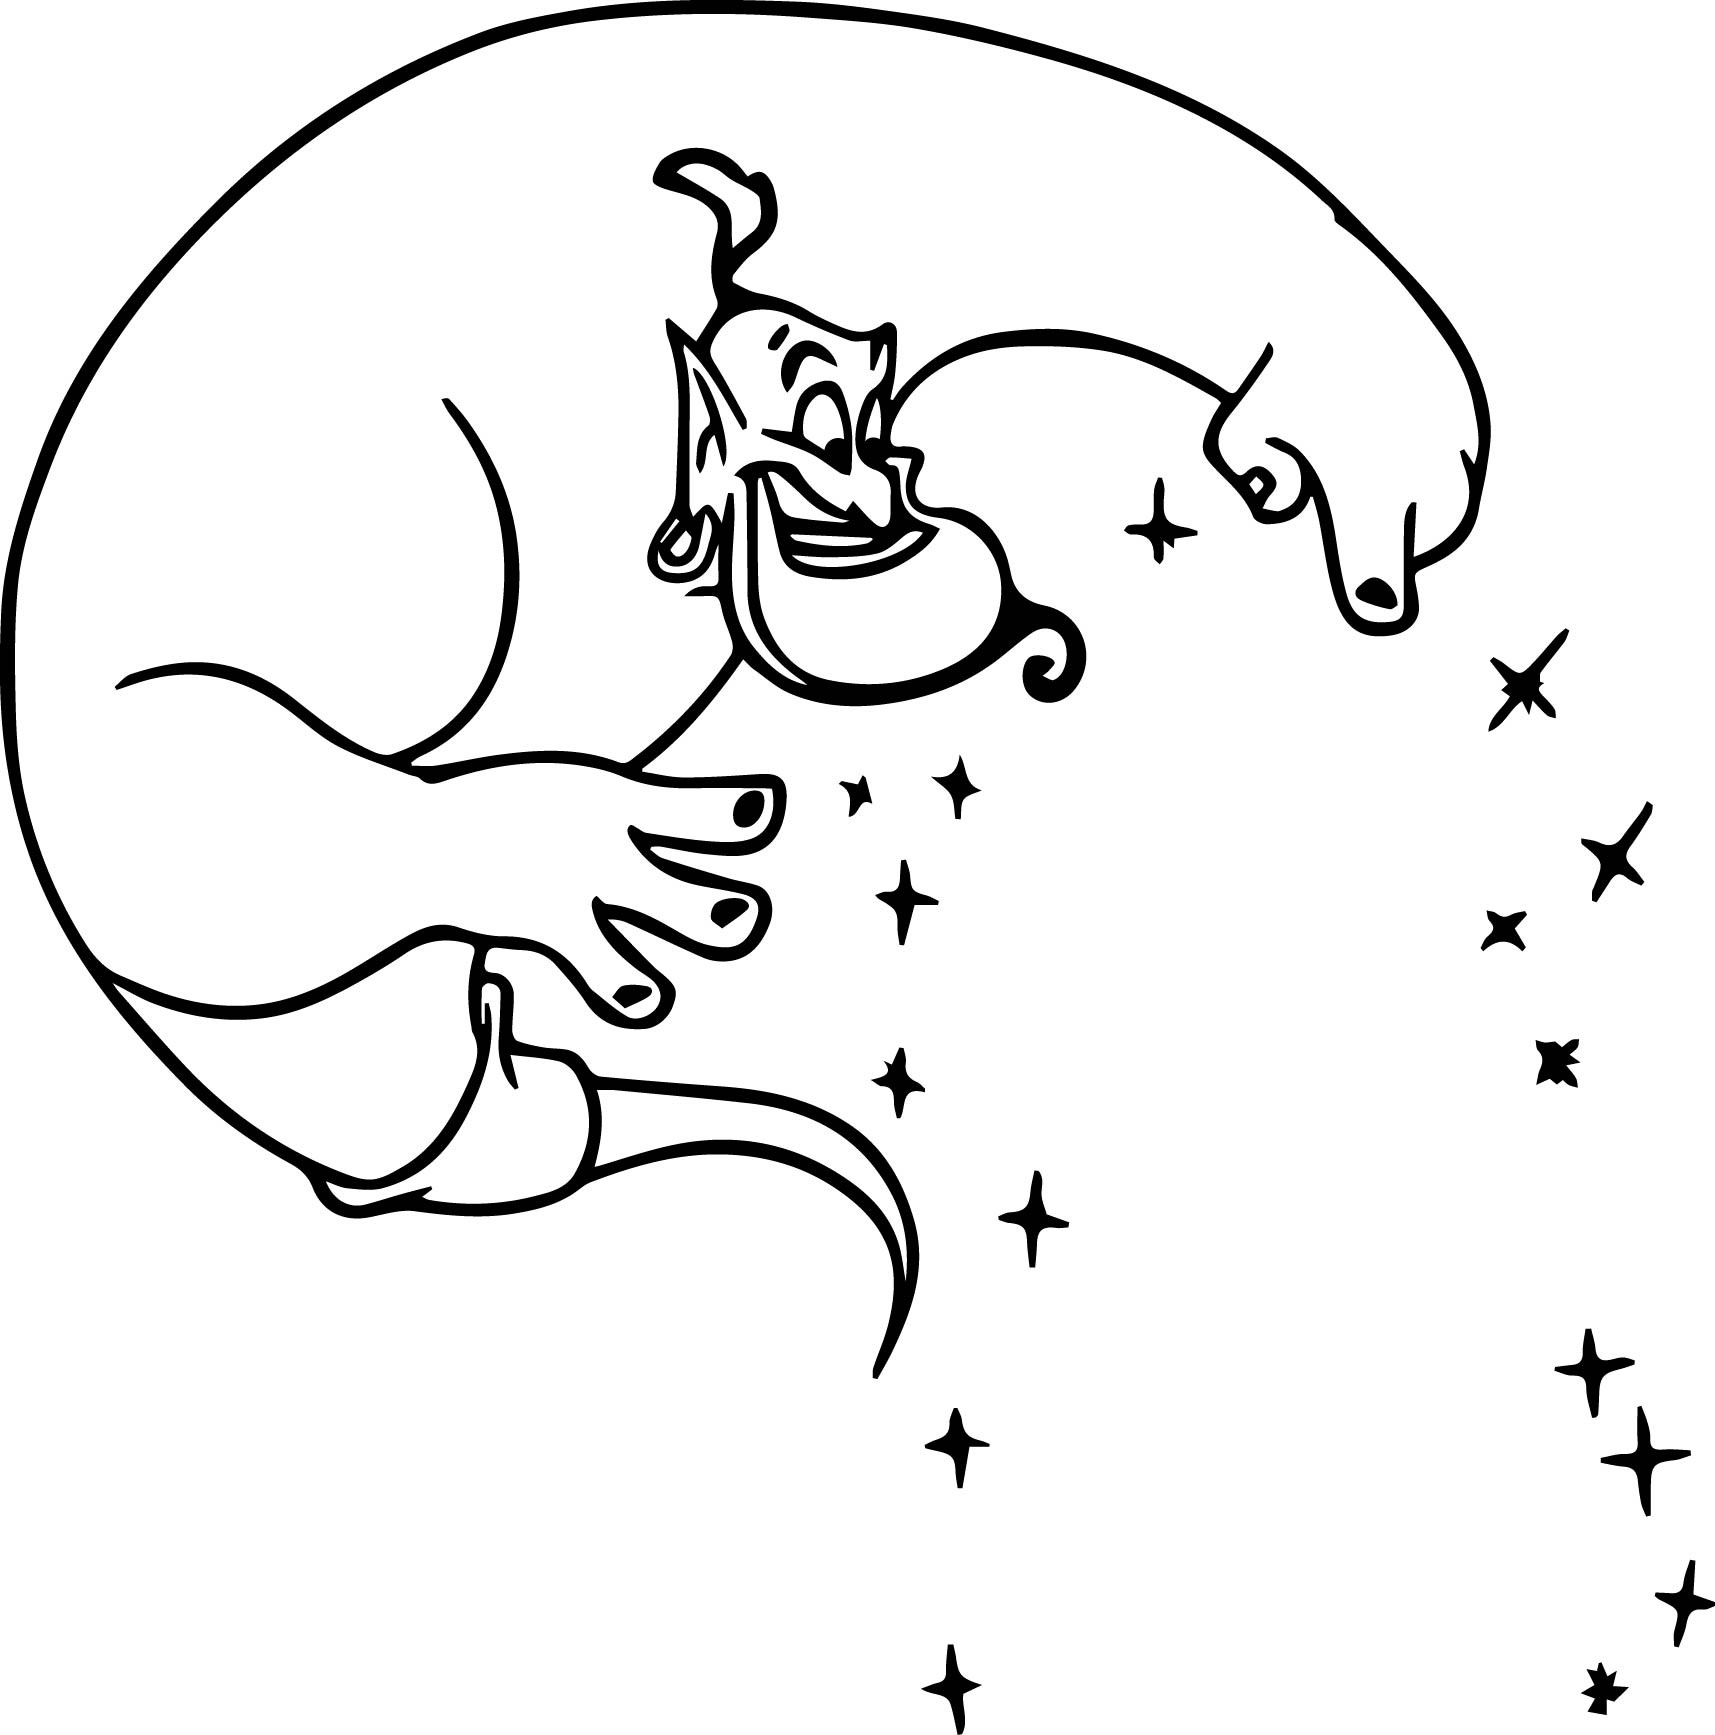 Coloring Pages : Genie Coloring At Getdrawings Free For Personal ...